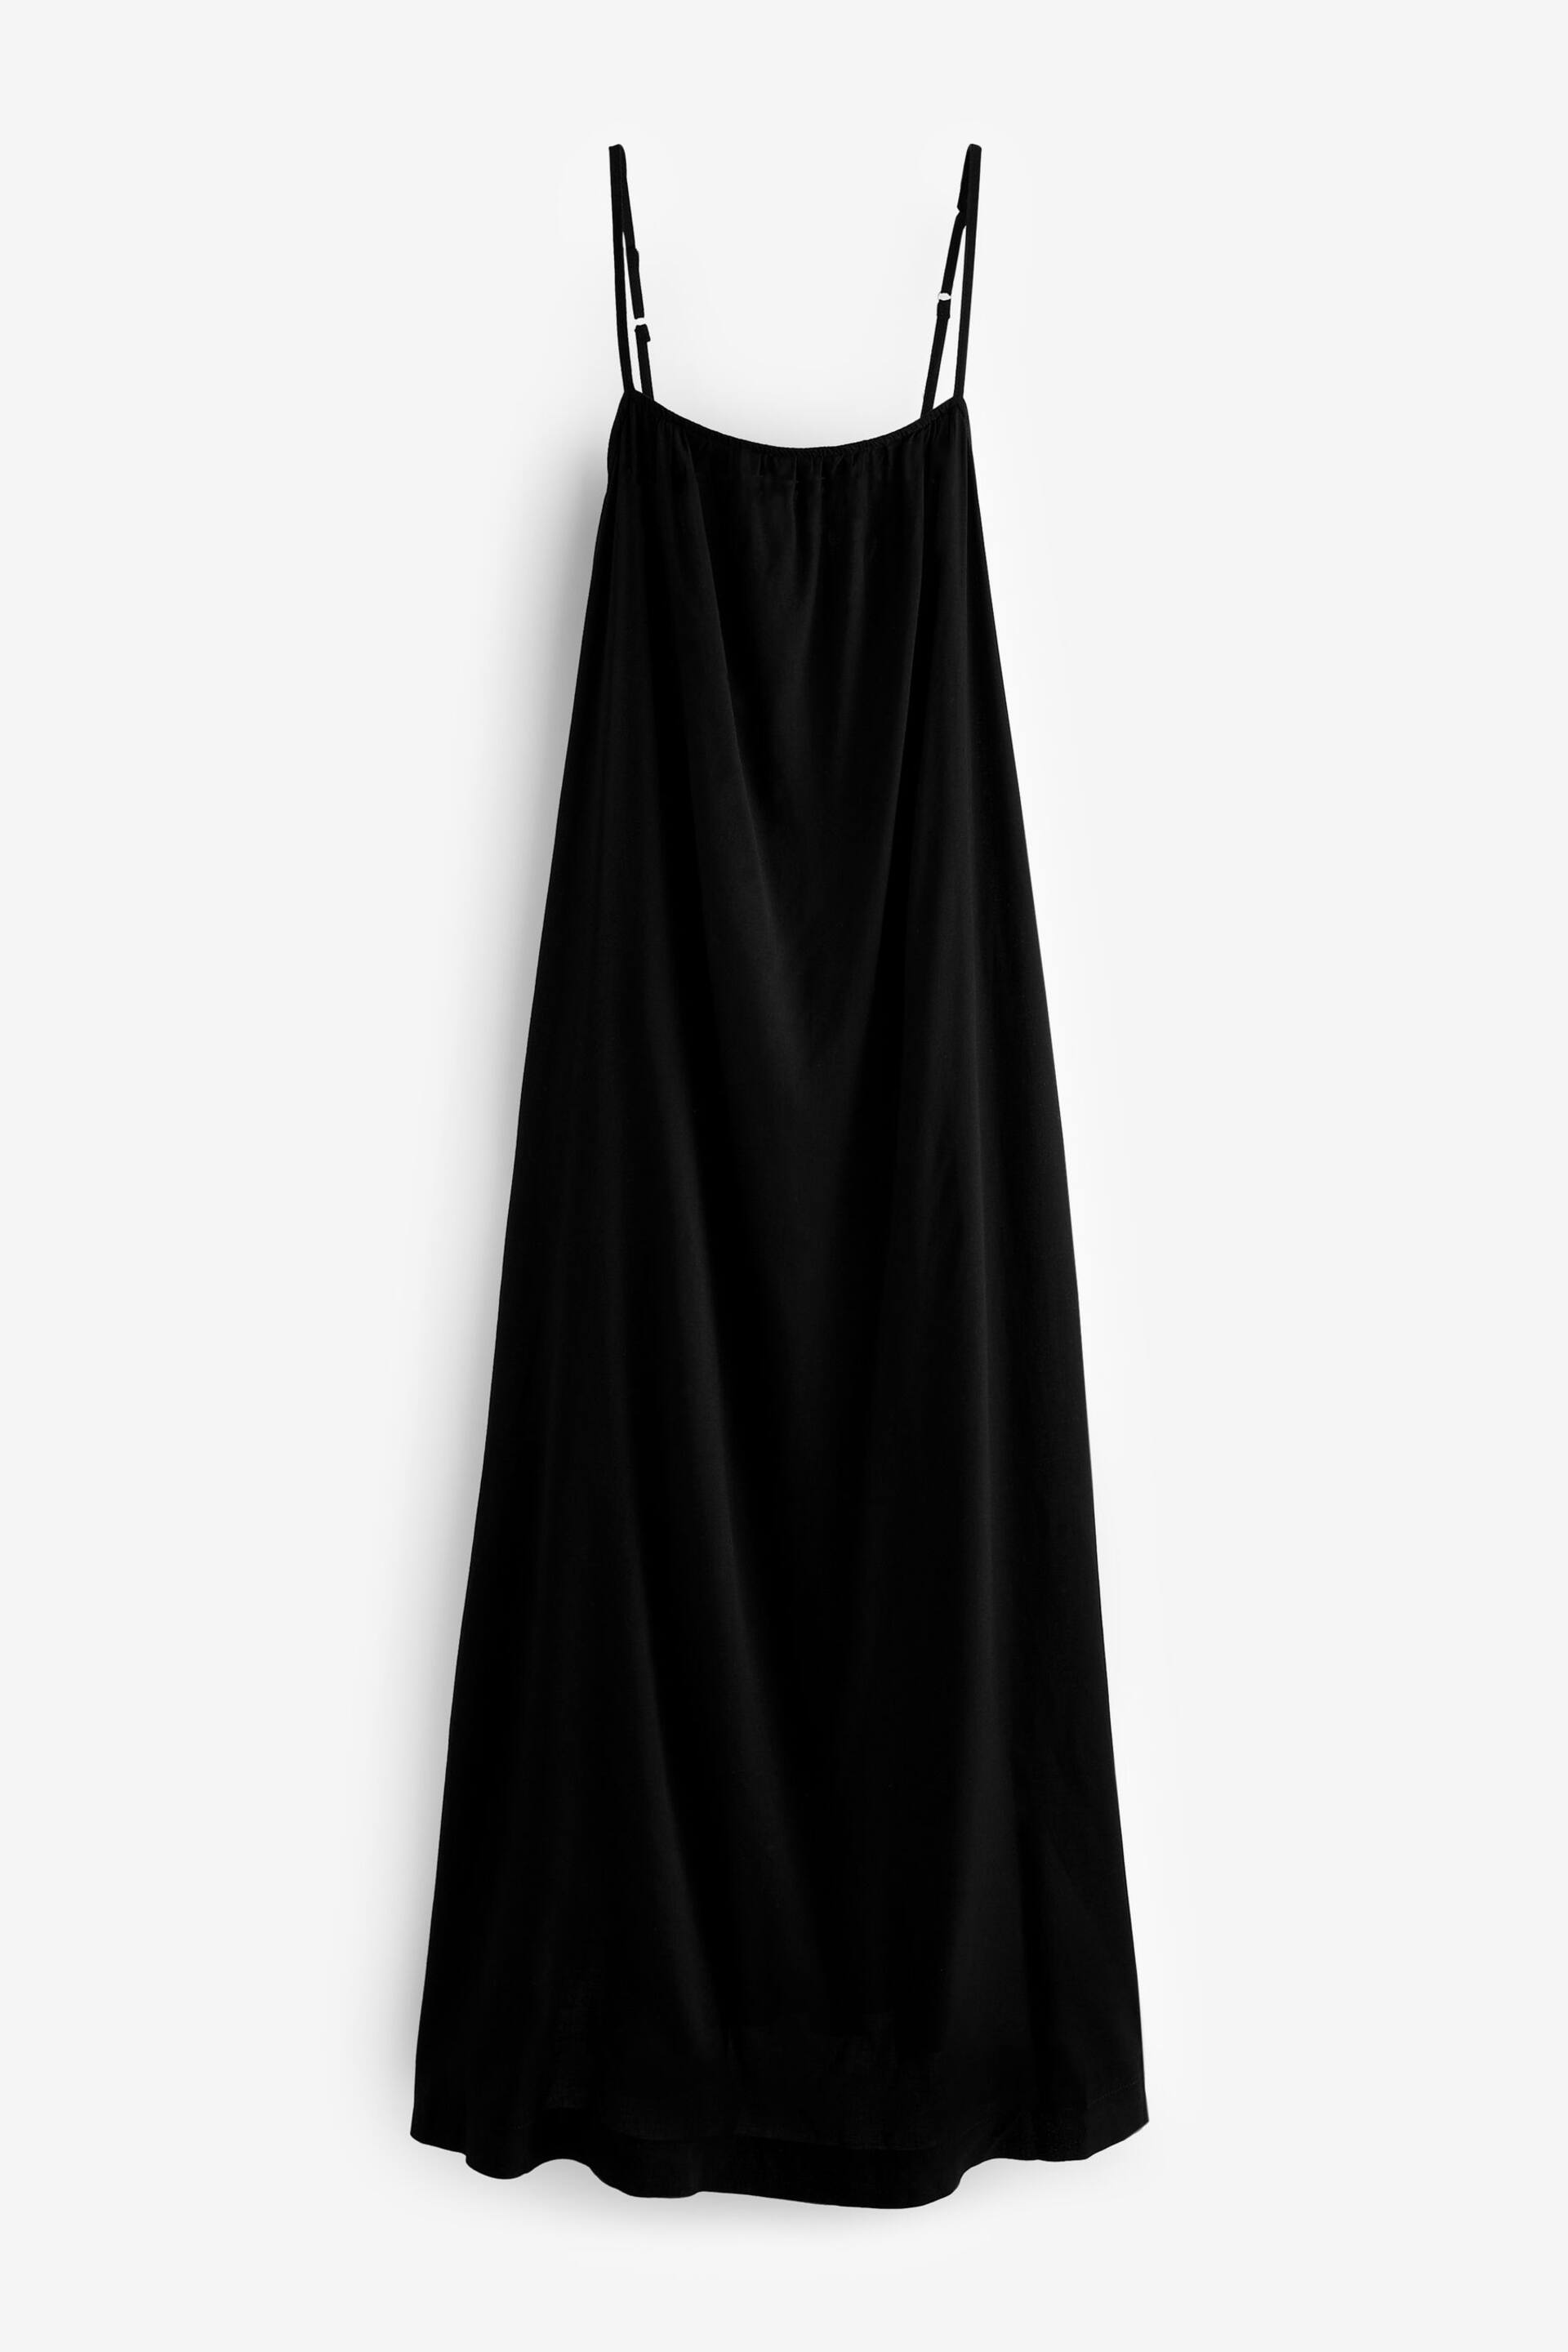 Black Tie Back Maxi Dress With Linen - Image 5 of 6